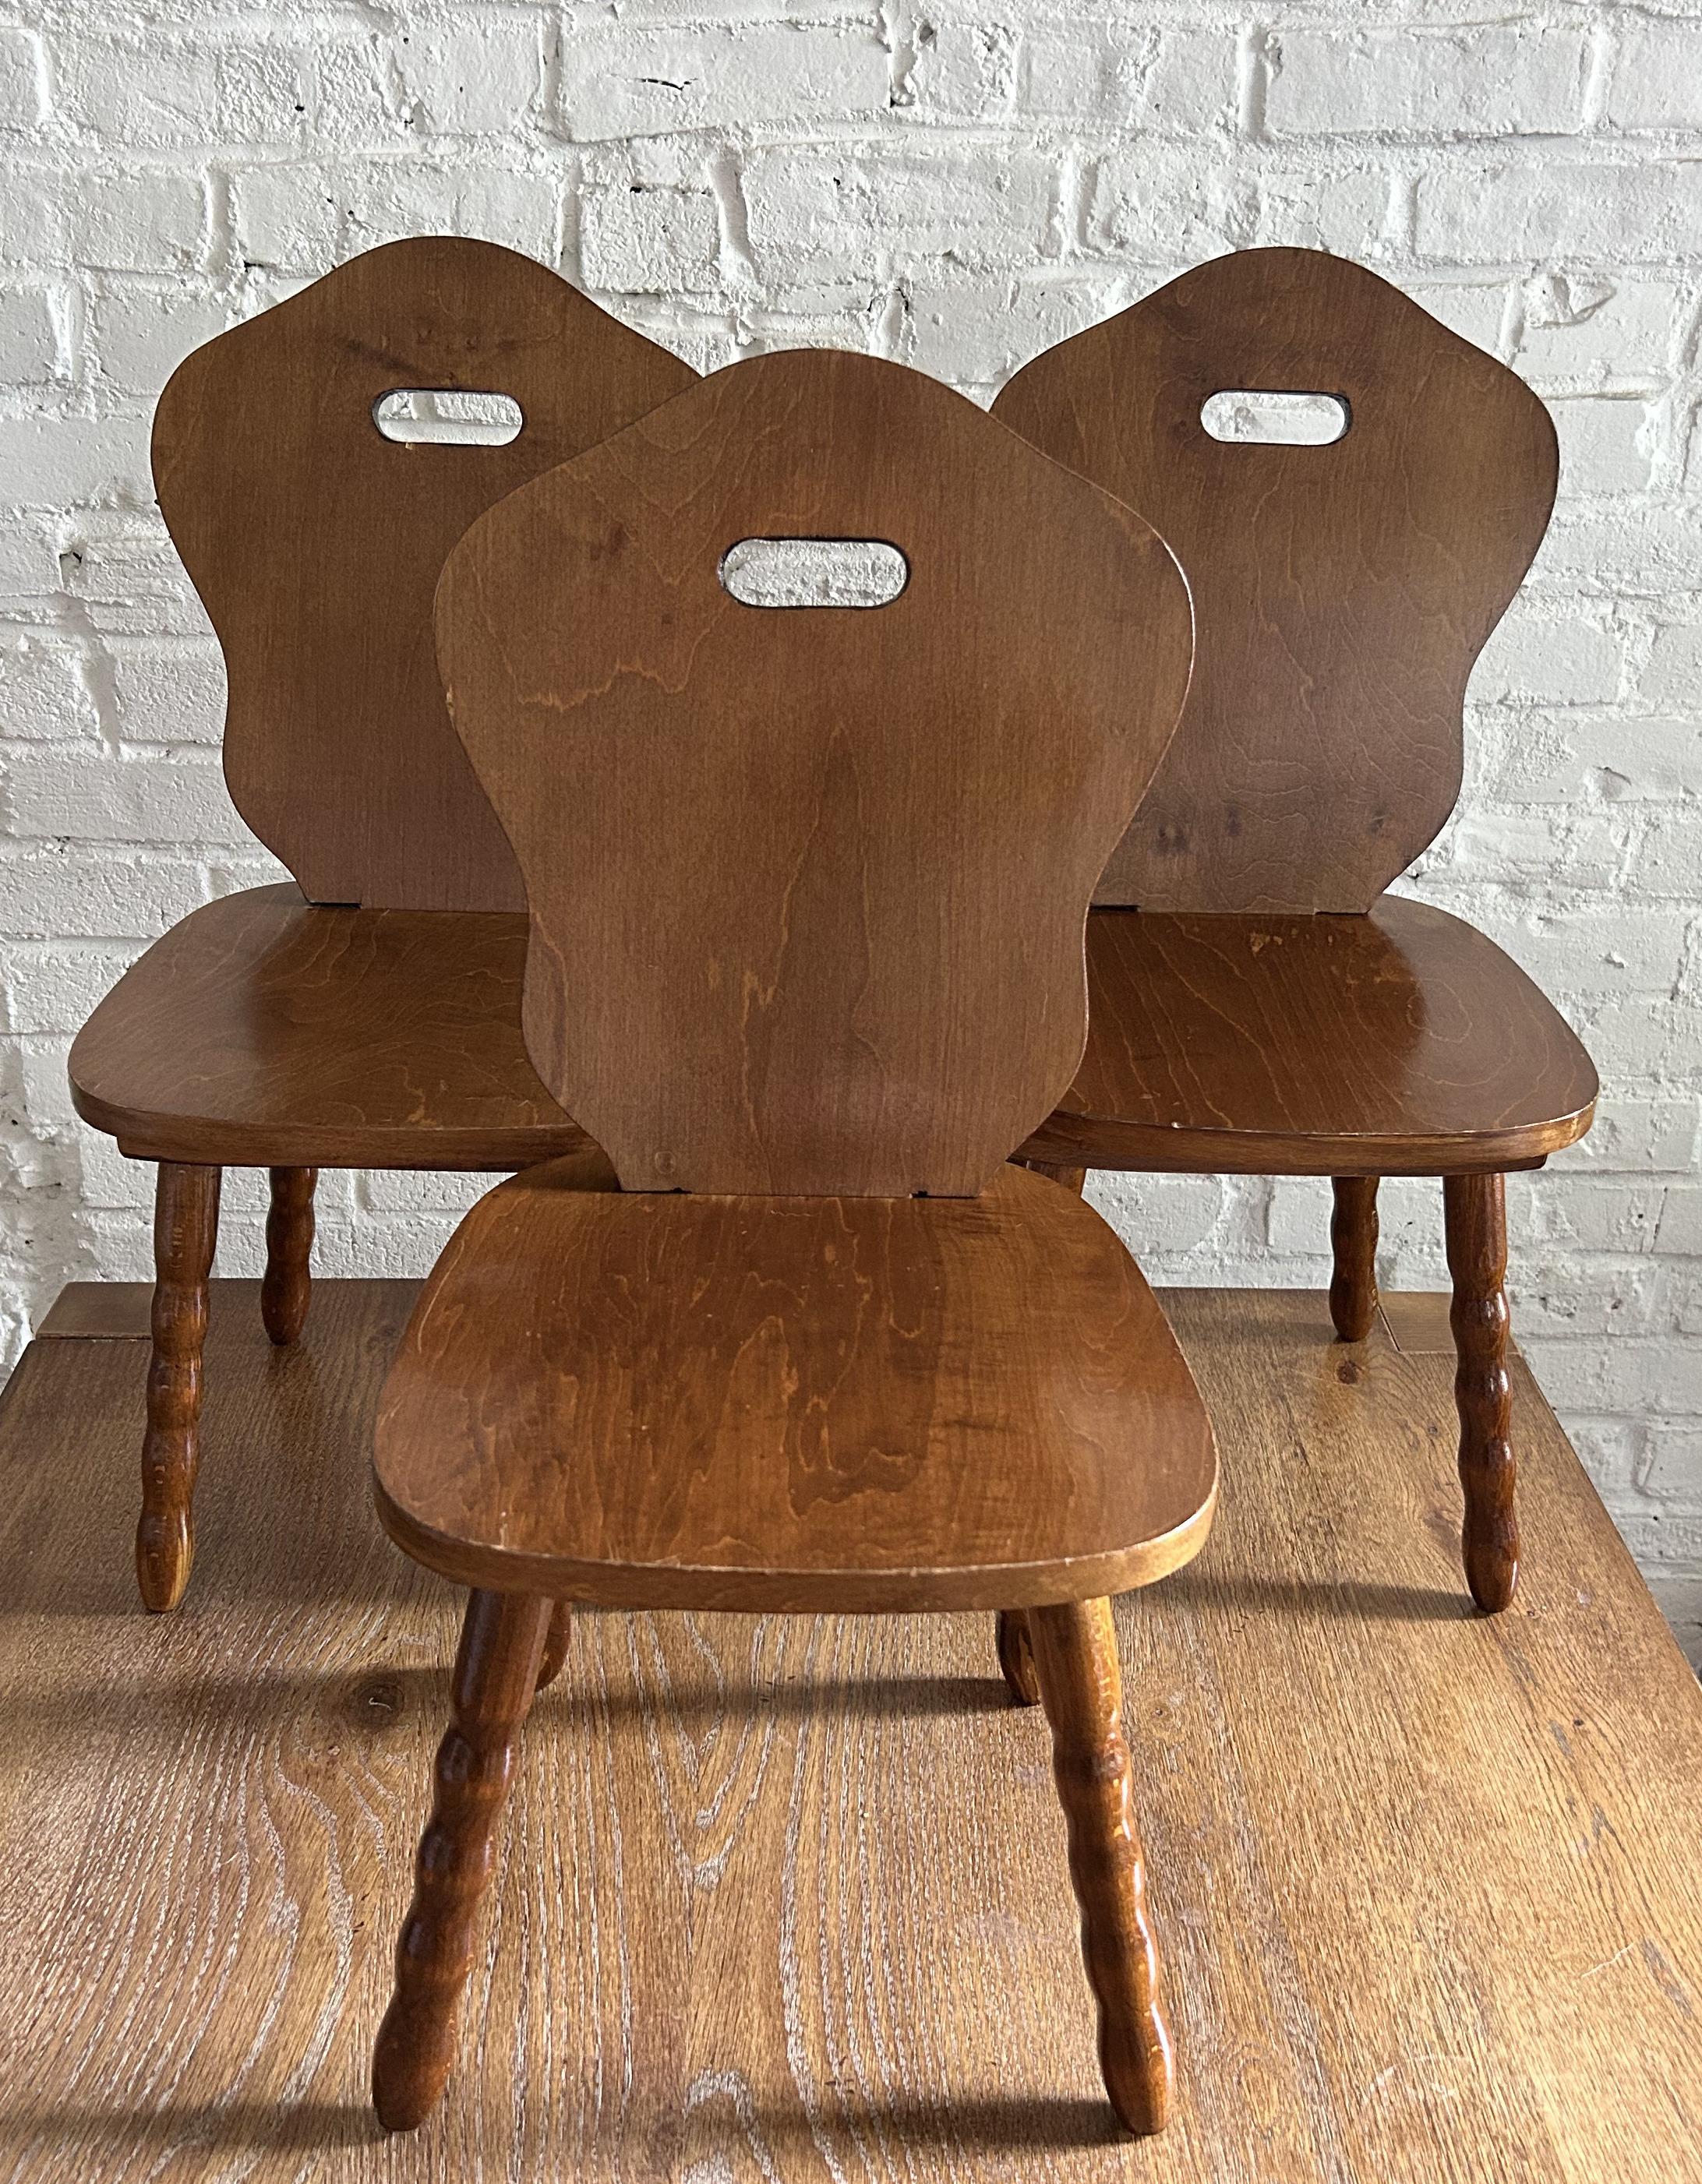 Rustic Set of 3 1960s Solid Wood Decorative Stools / Children's Chair, Made in Romania